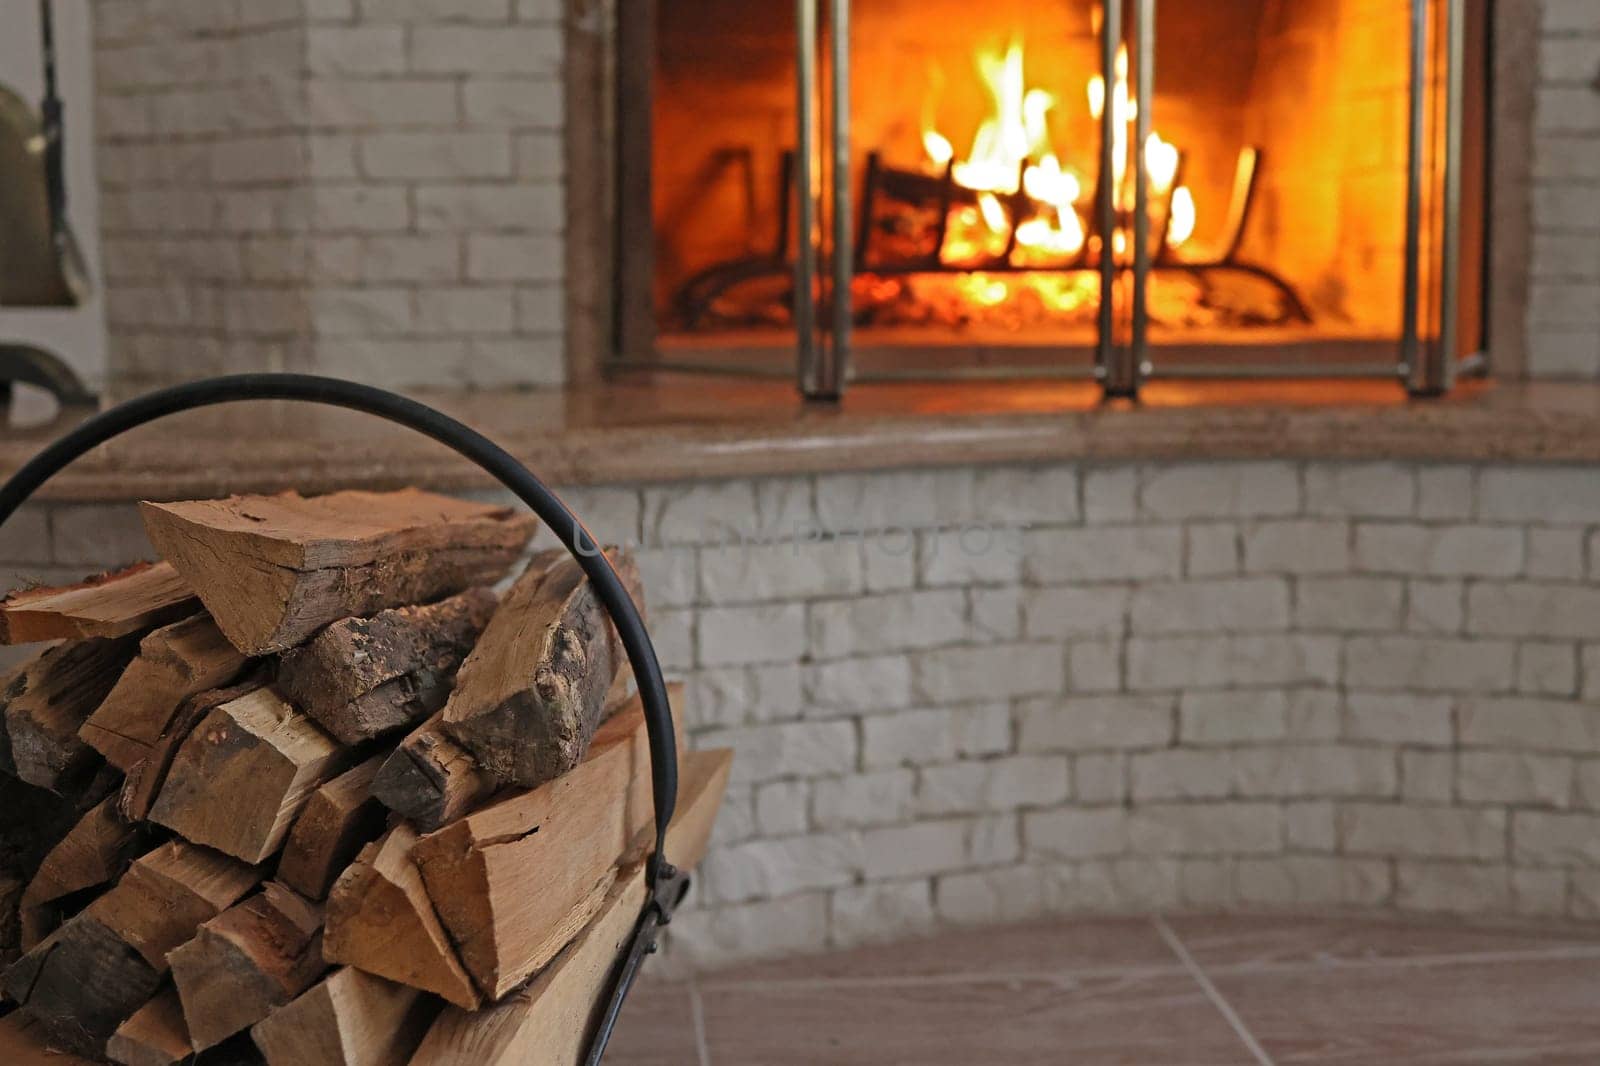 heating the house with wood using a fireplace. firewood is stacked in front of a burning fireplace by Proxima13